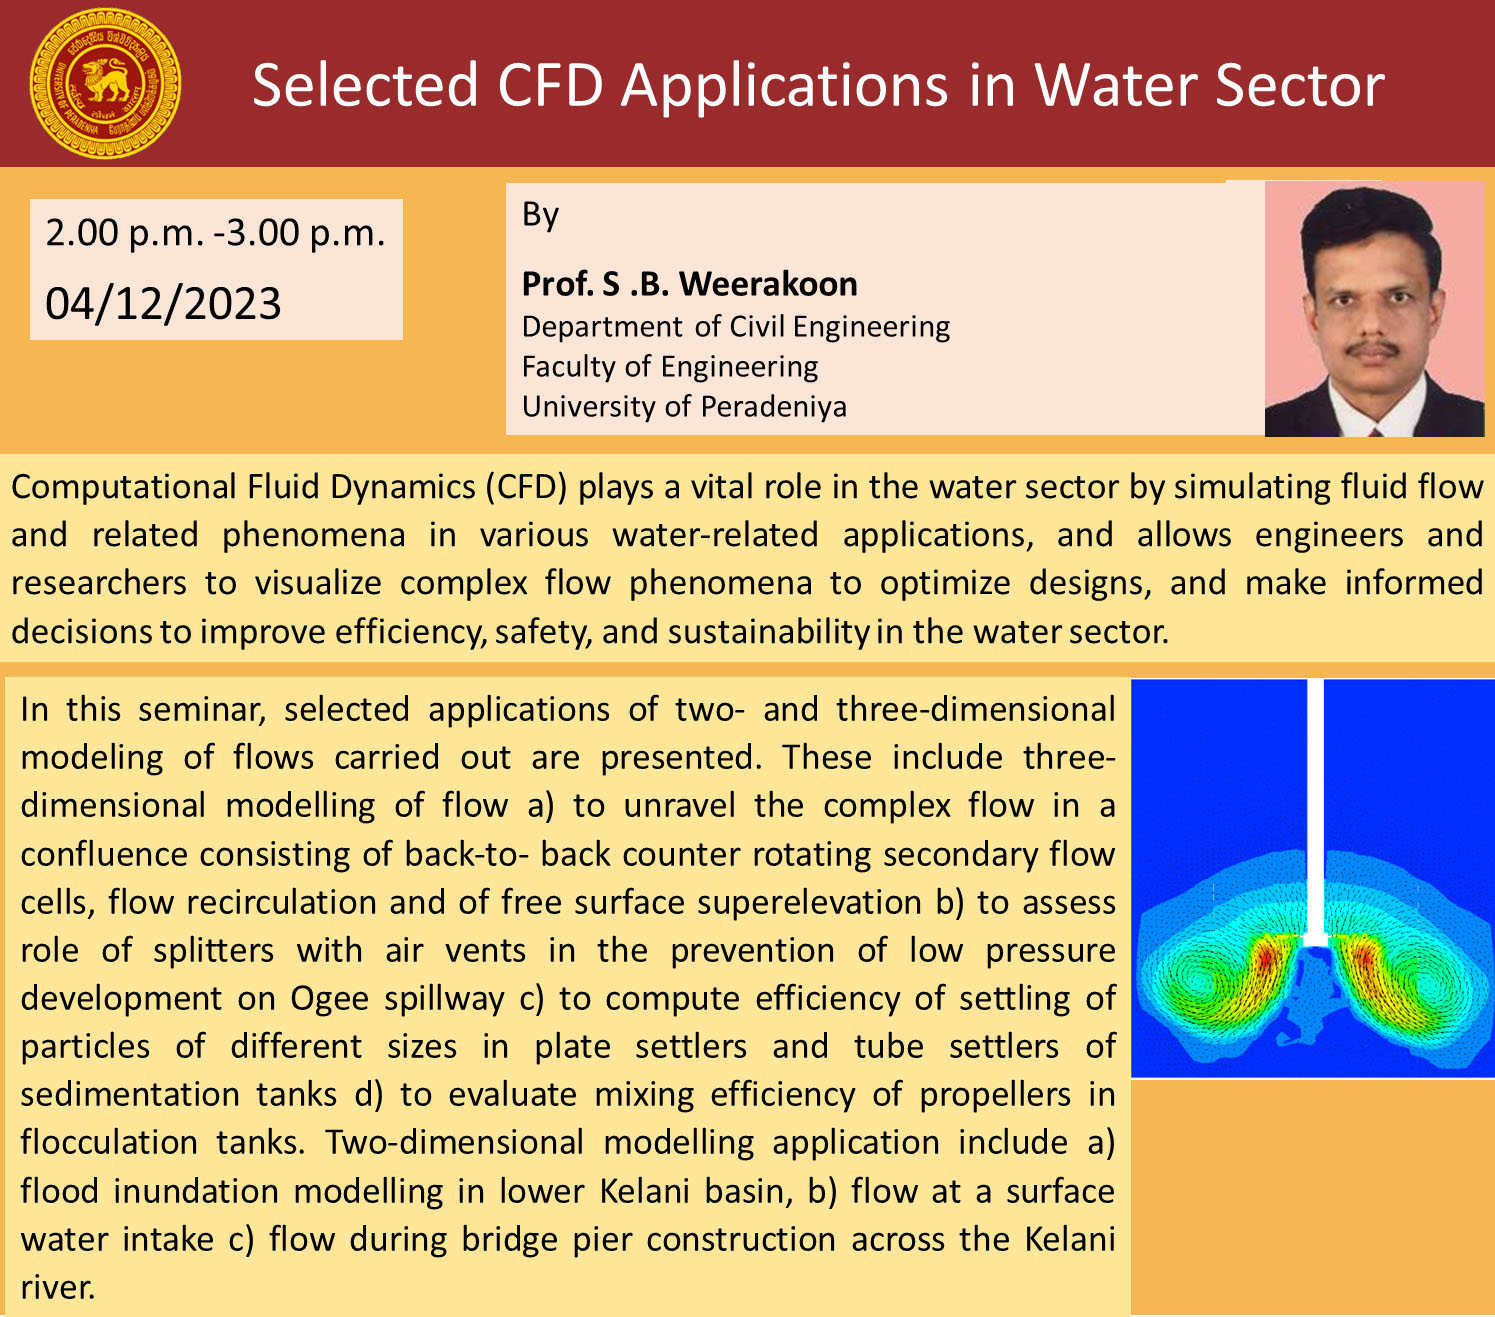 Selected CFD Applications in Water Sector